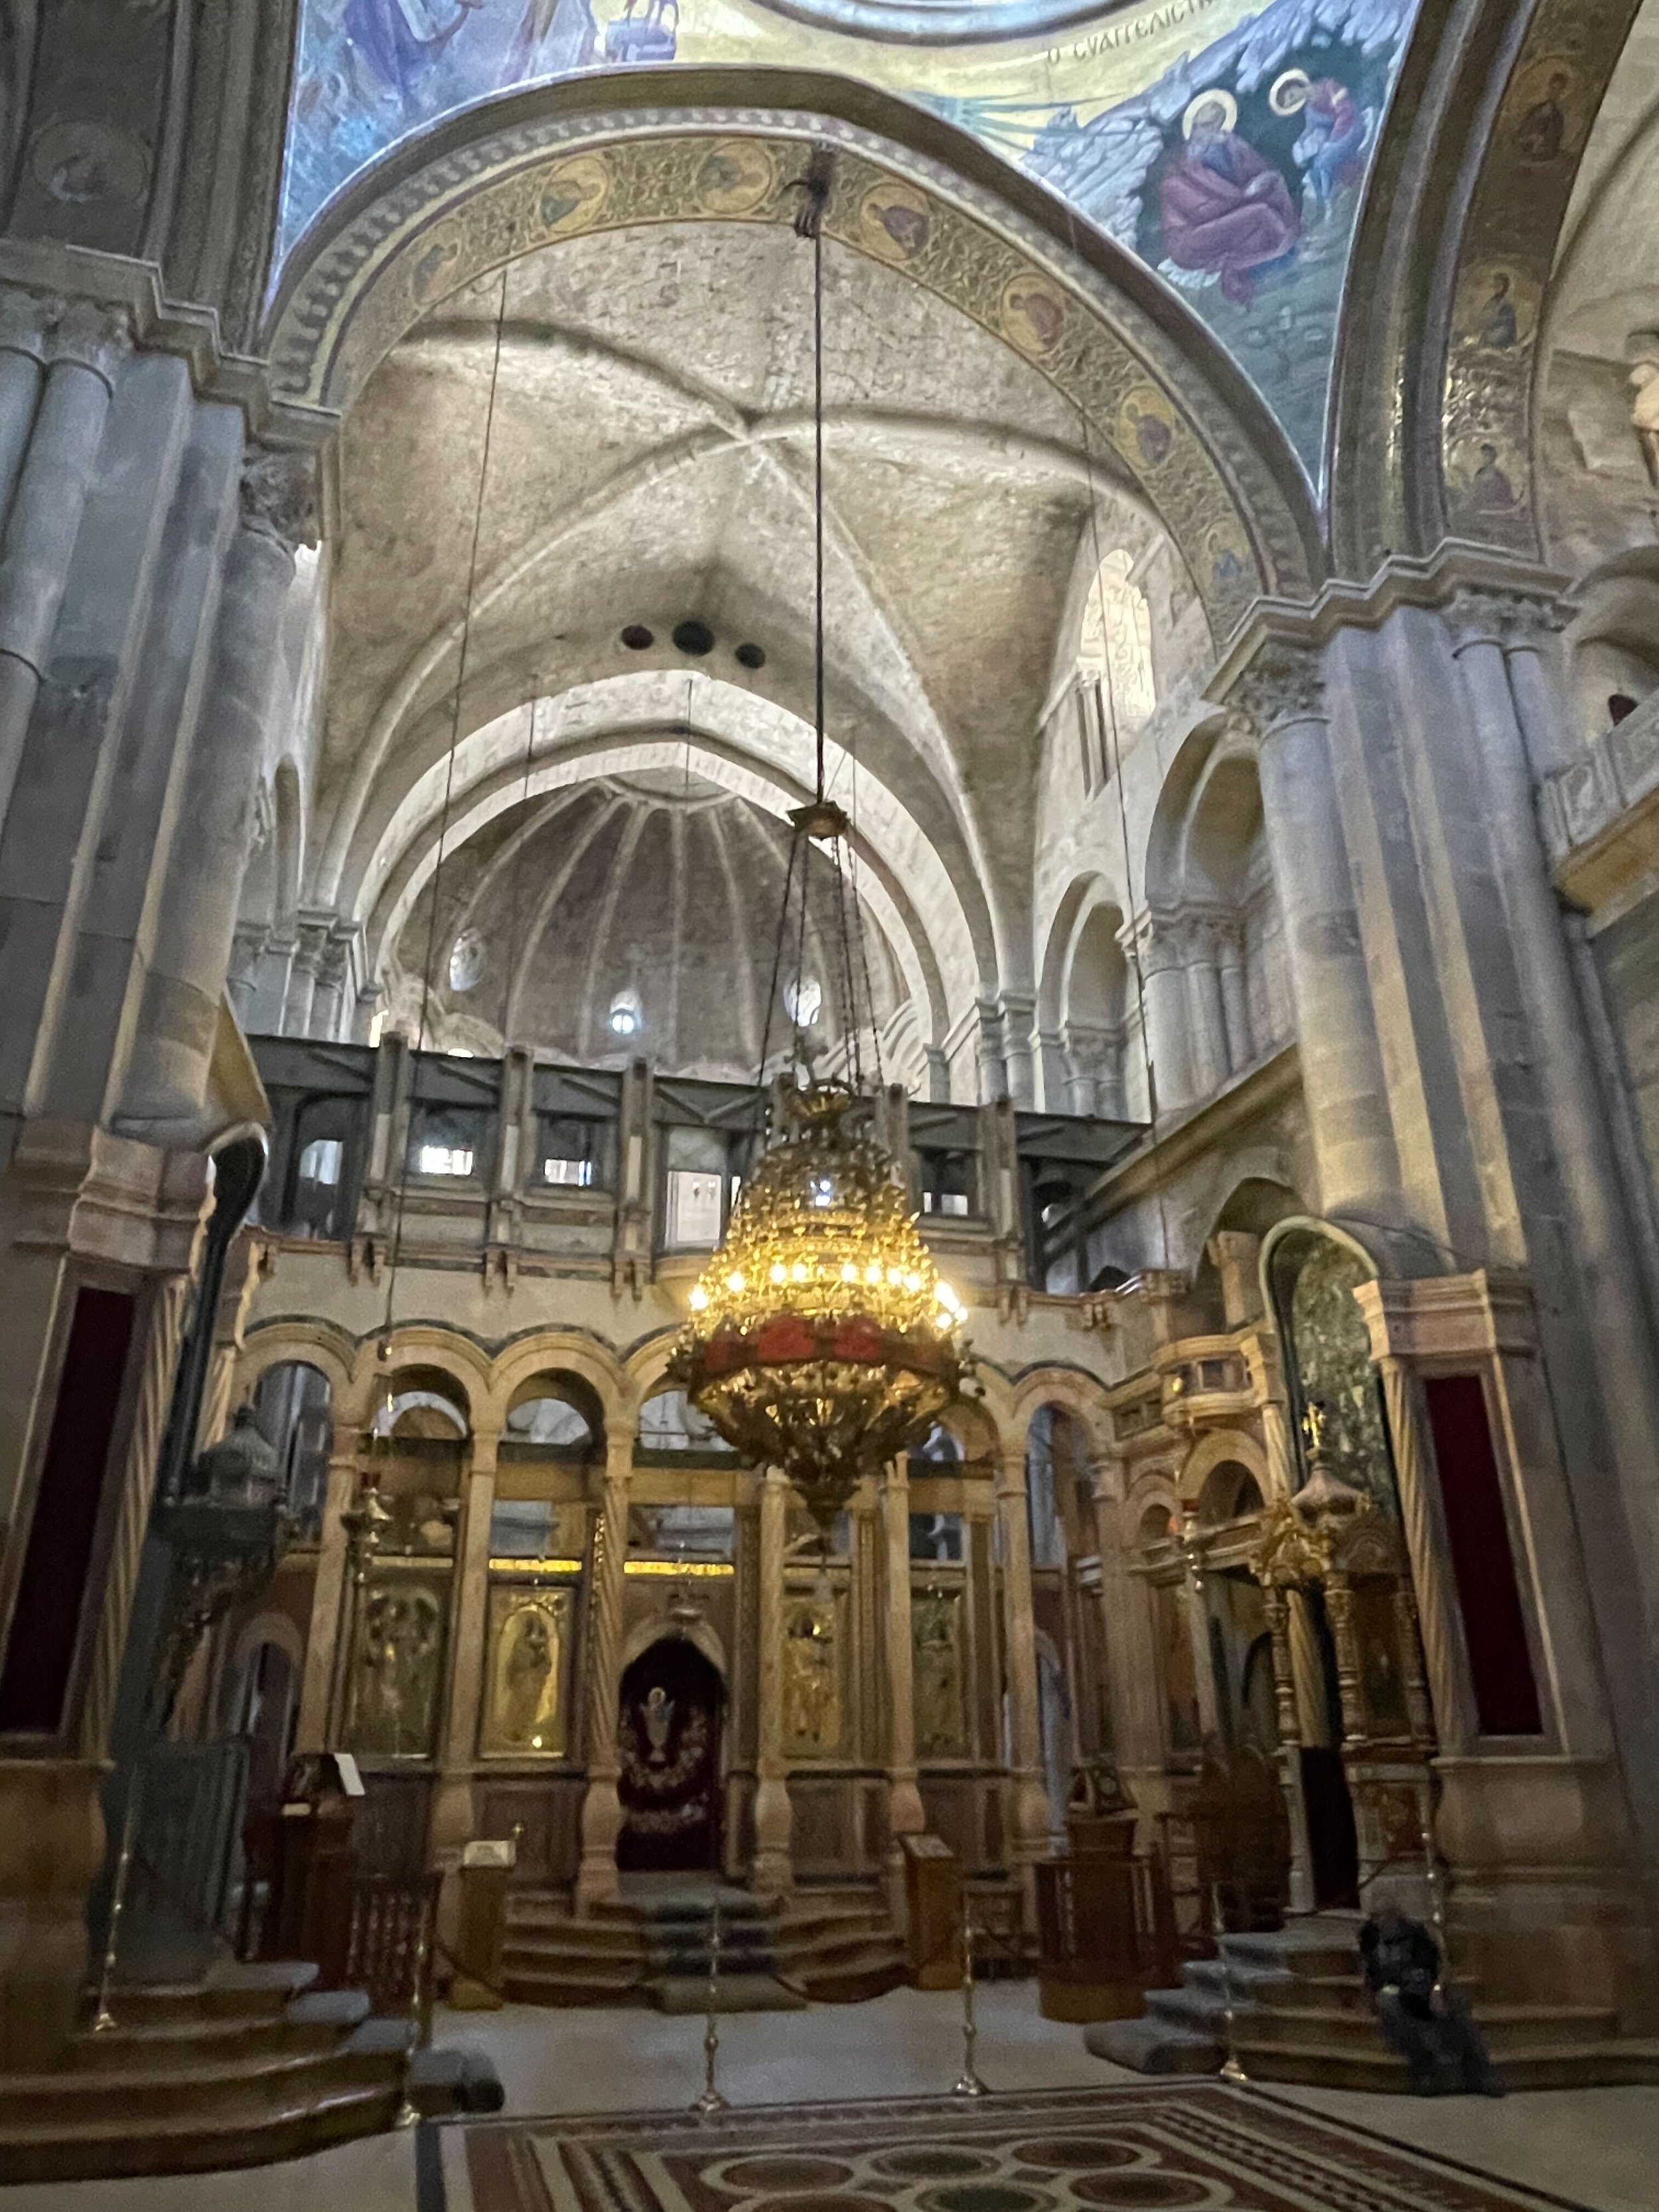 Interior of the Church of the Sepulchre